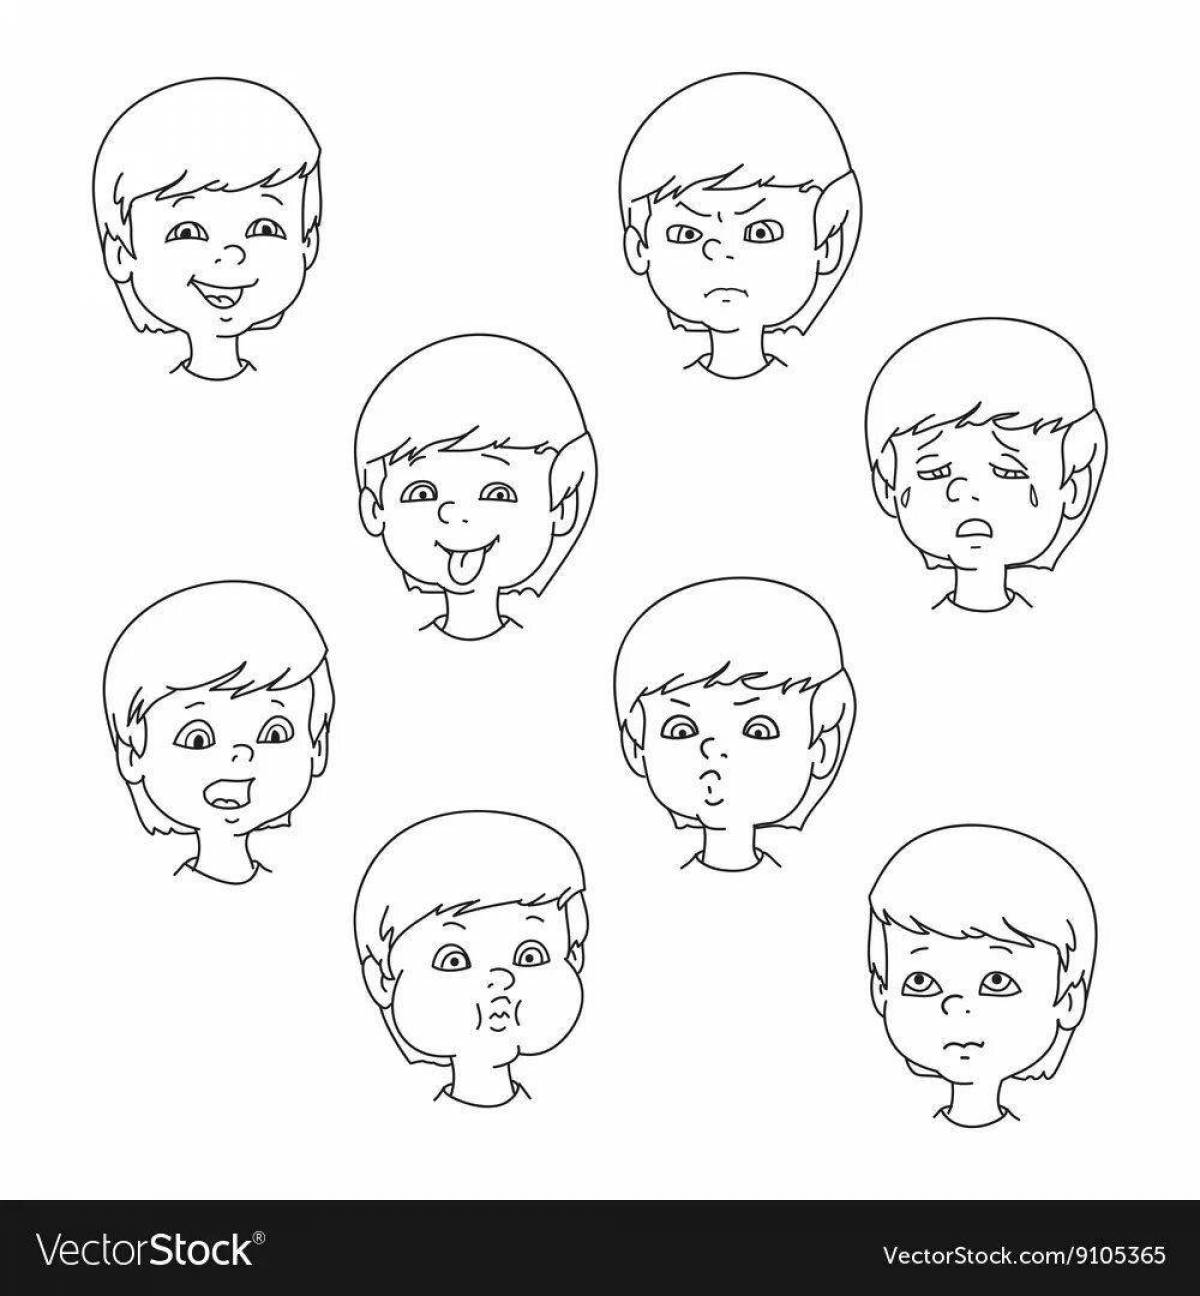 Relaxed facial expressions coloring pages for kids